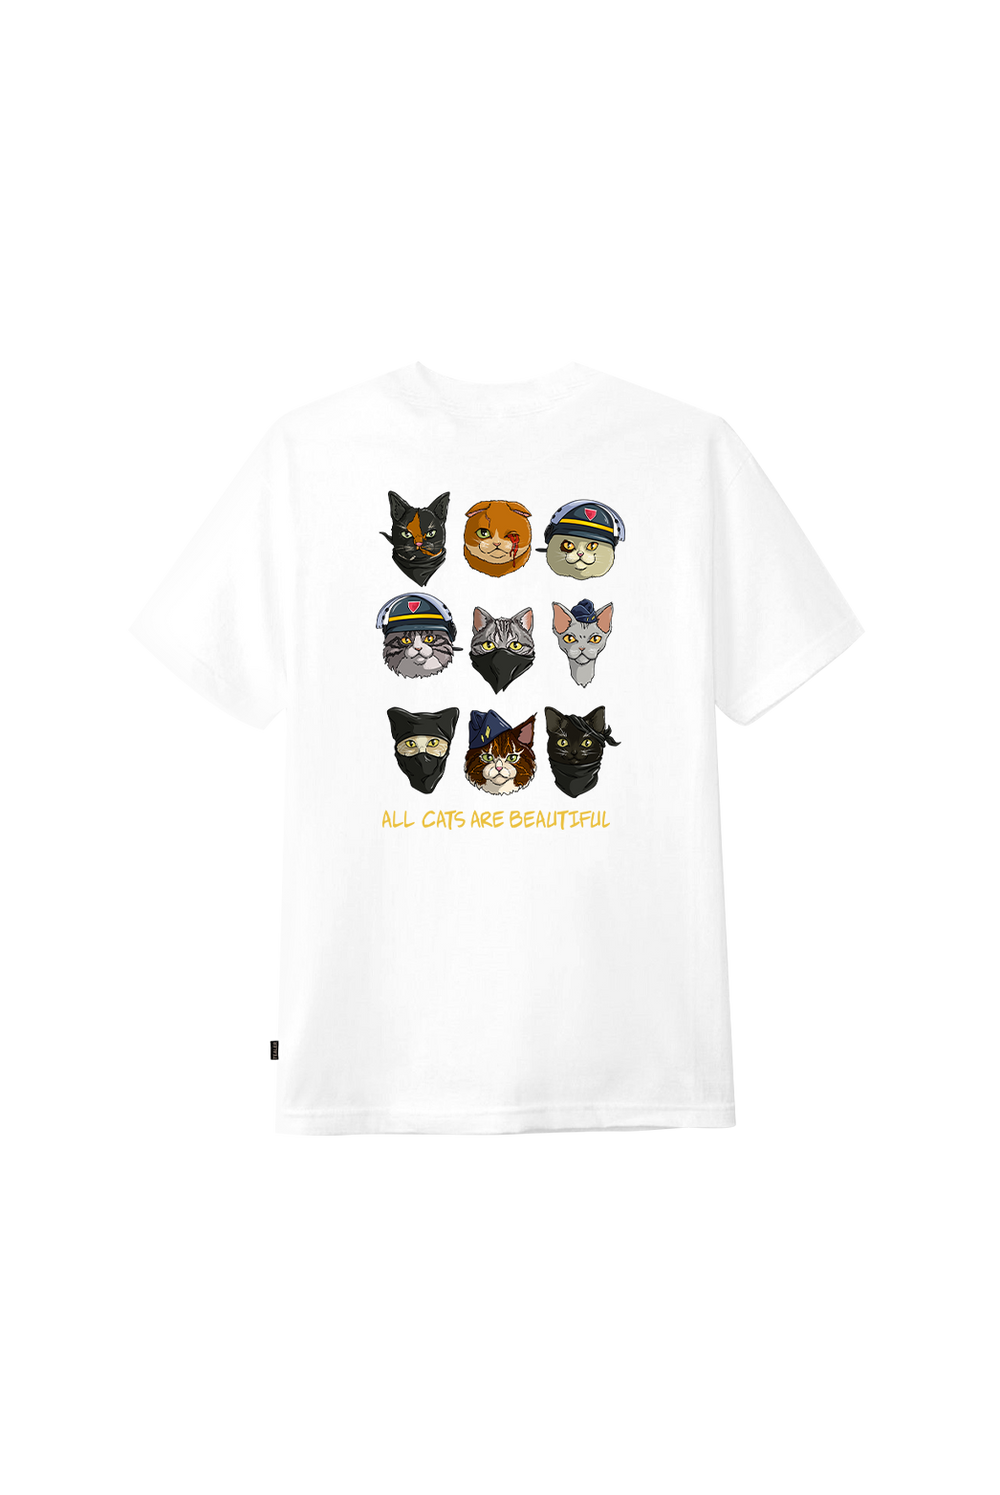 Acab all cats are beautifull, Tee White